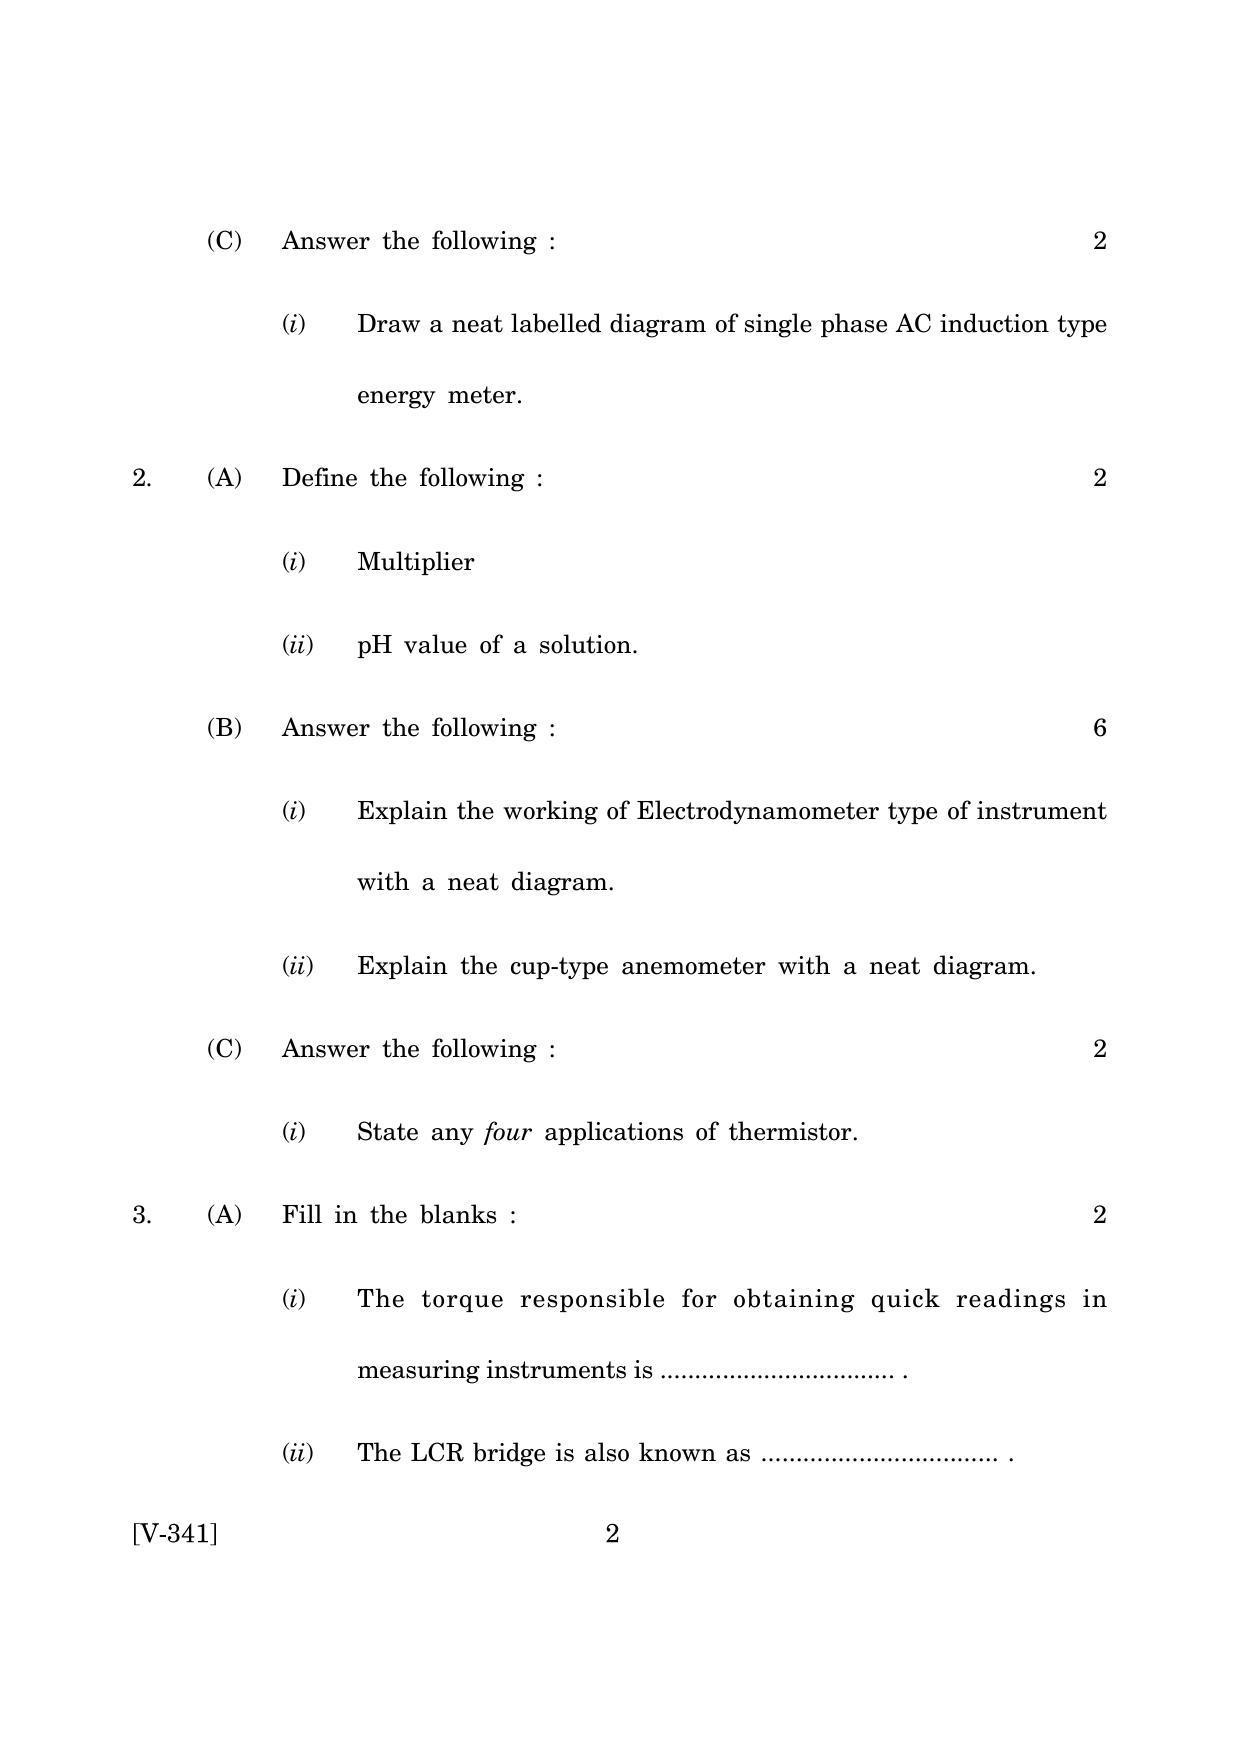 Goa Board Class 12 Electronic and Electrical Measurements  2019 (March 2019) Question Paper - Page 2